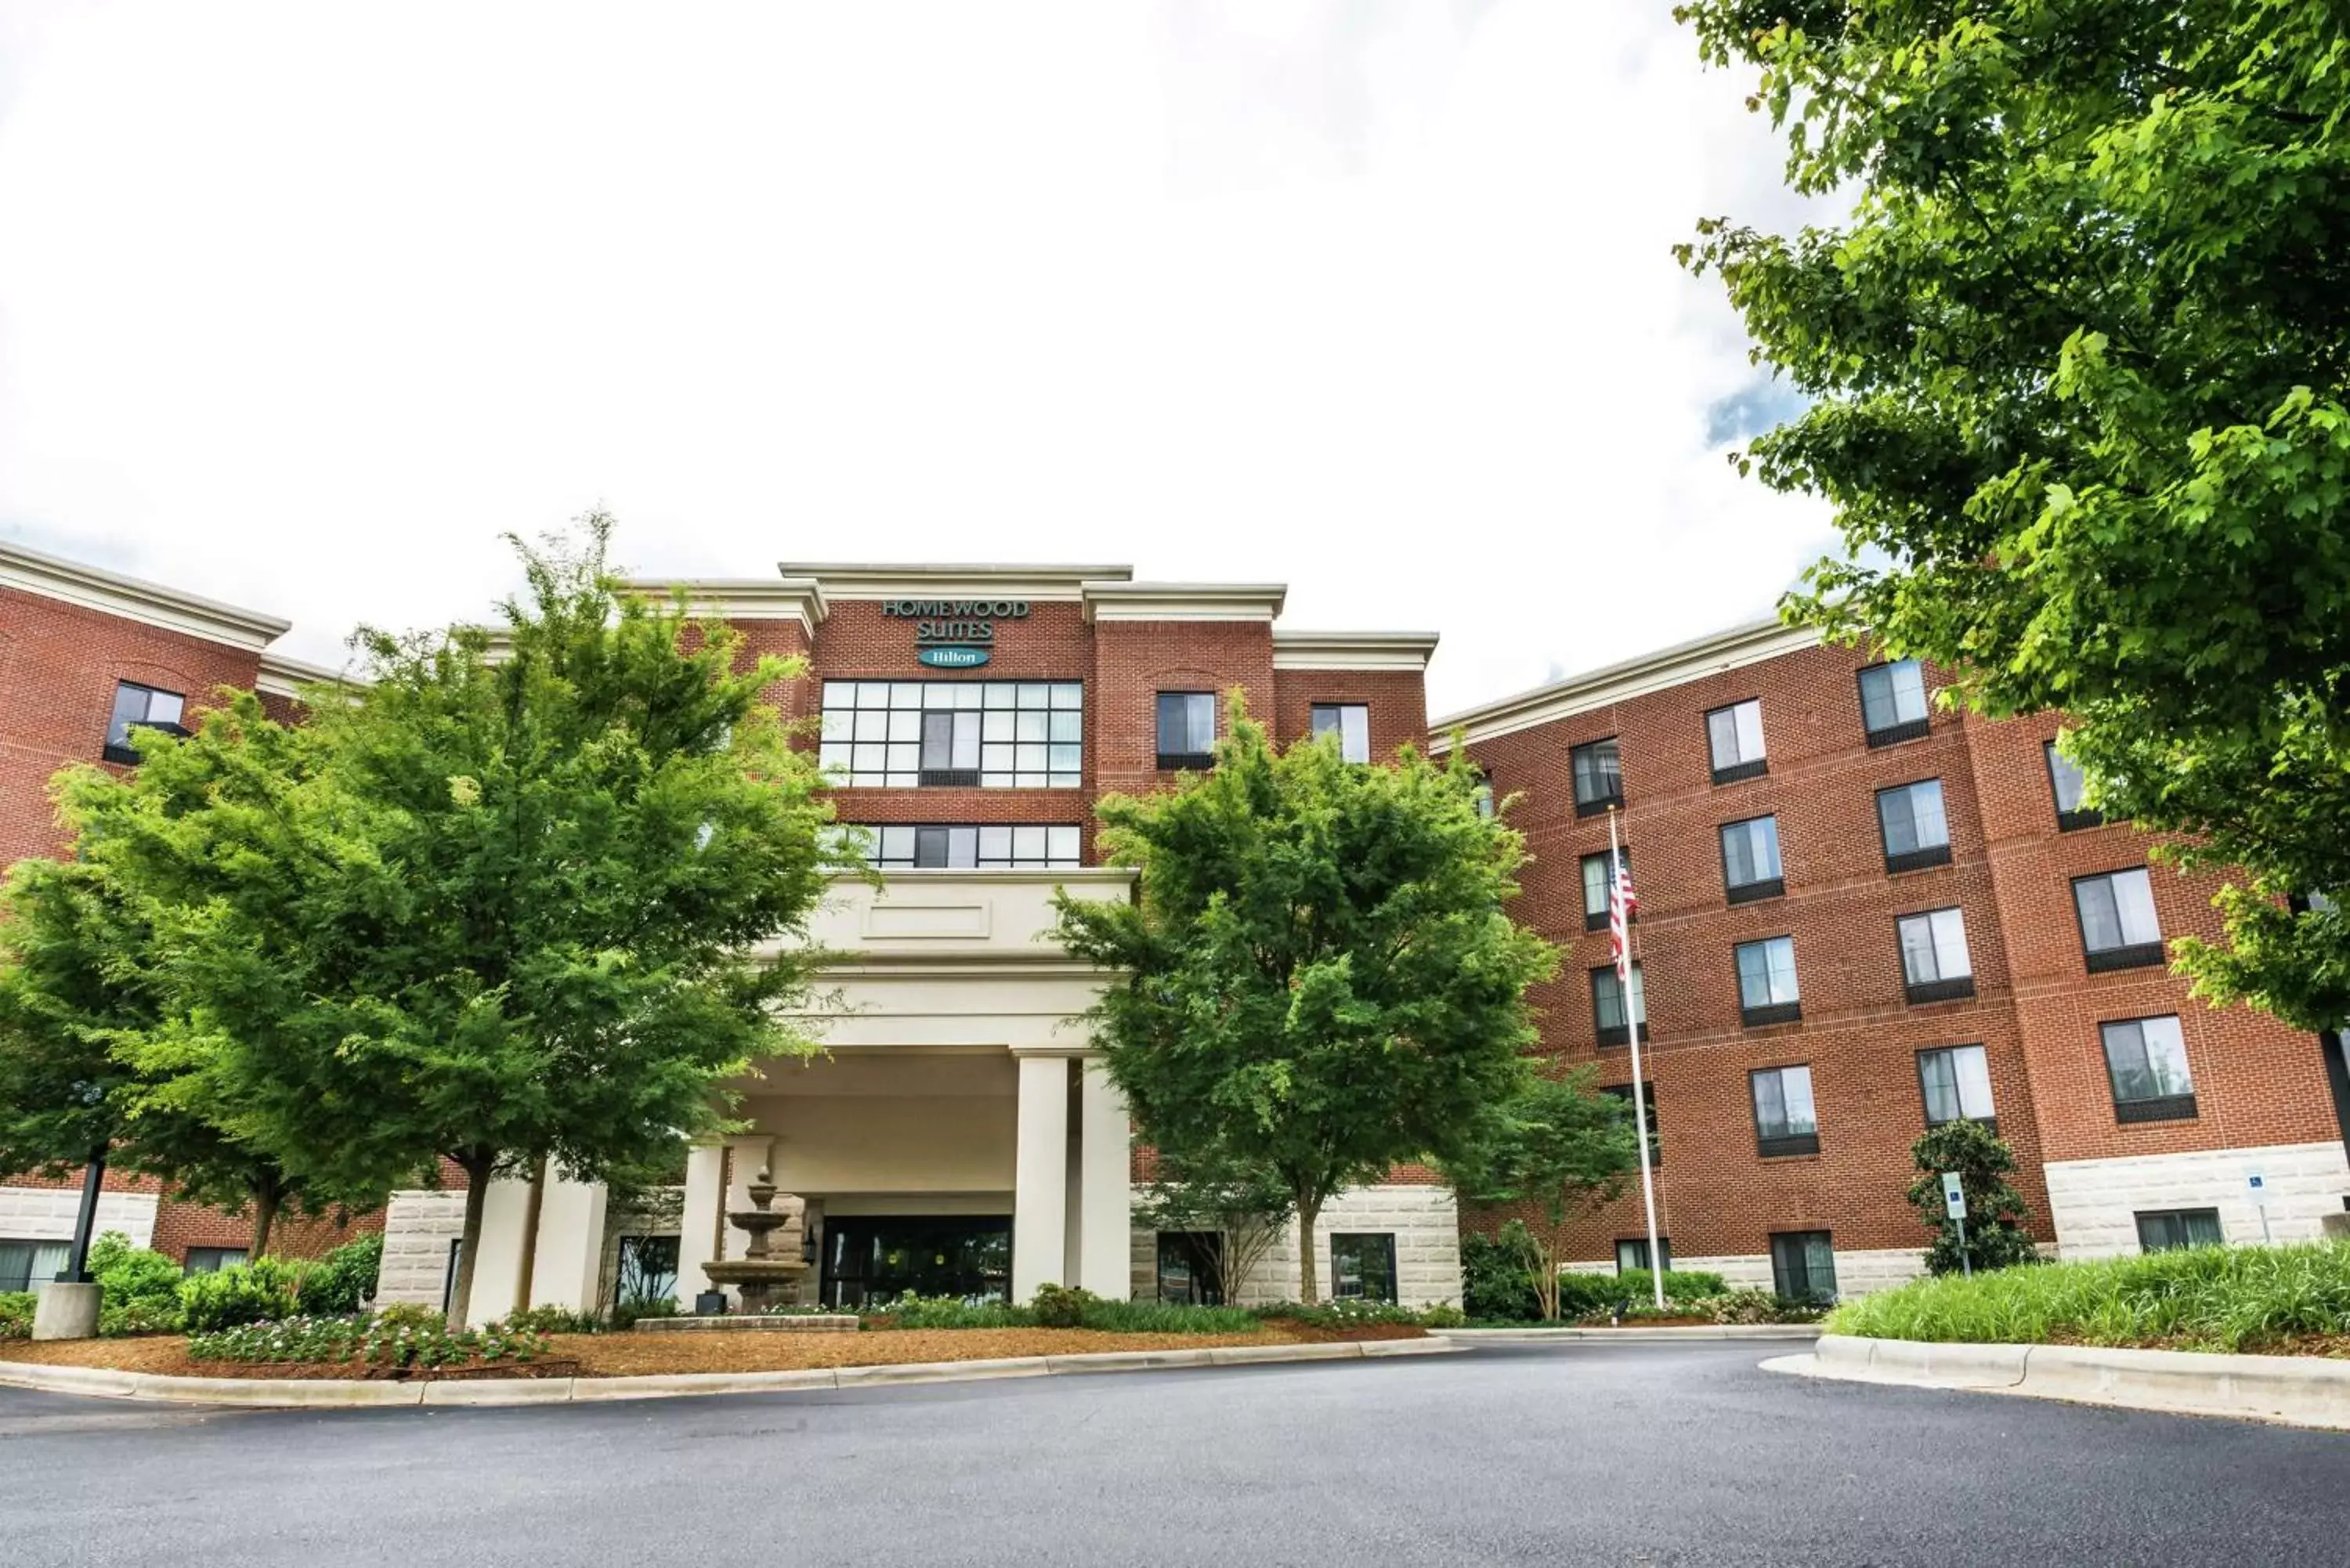 Property Building in Homewood Suites by Hilton Davidson